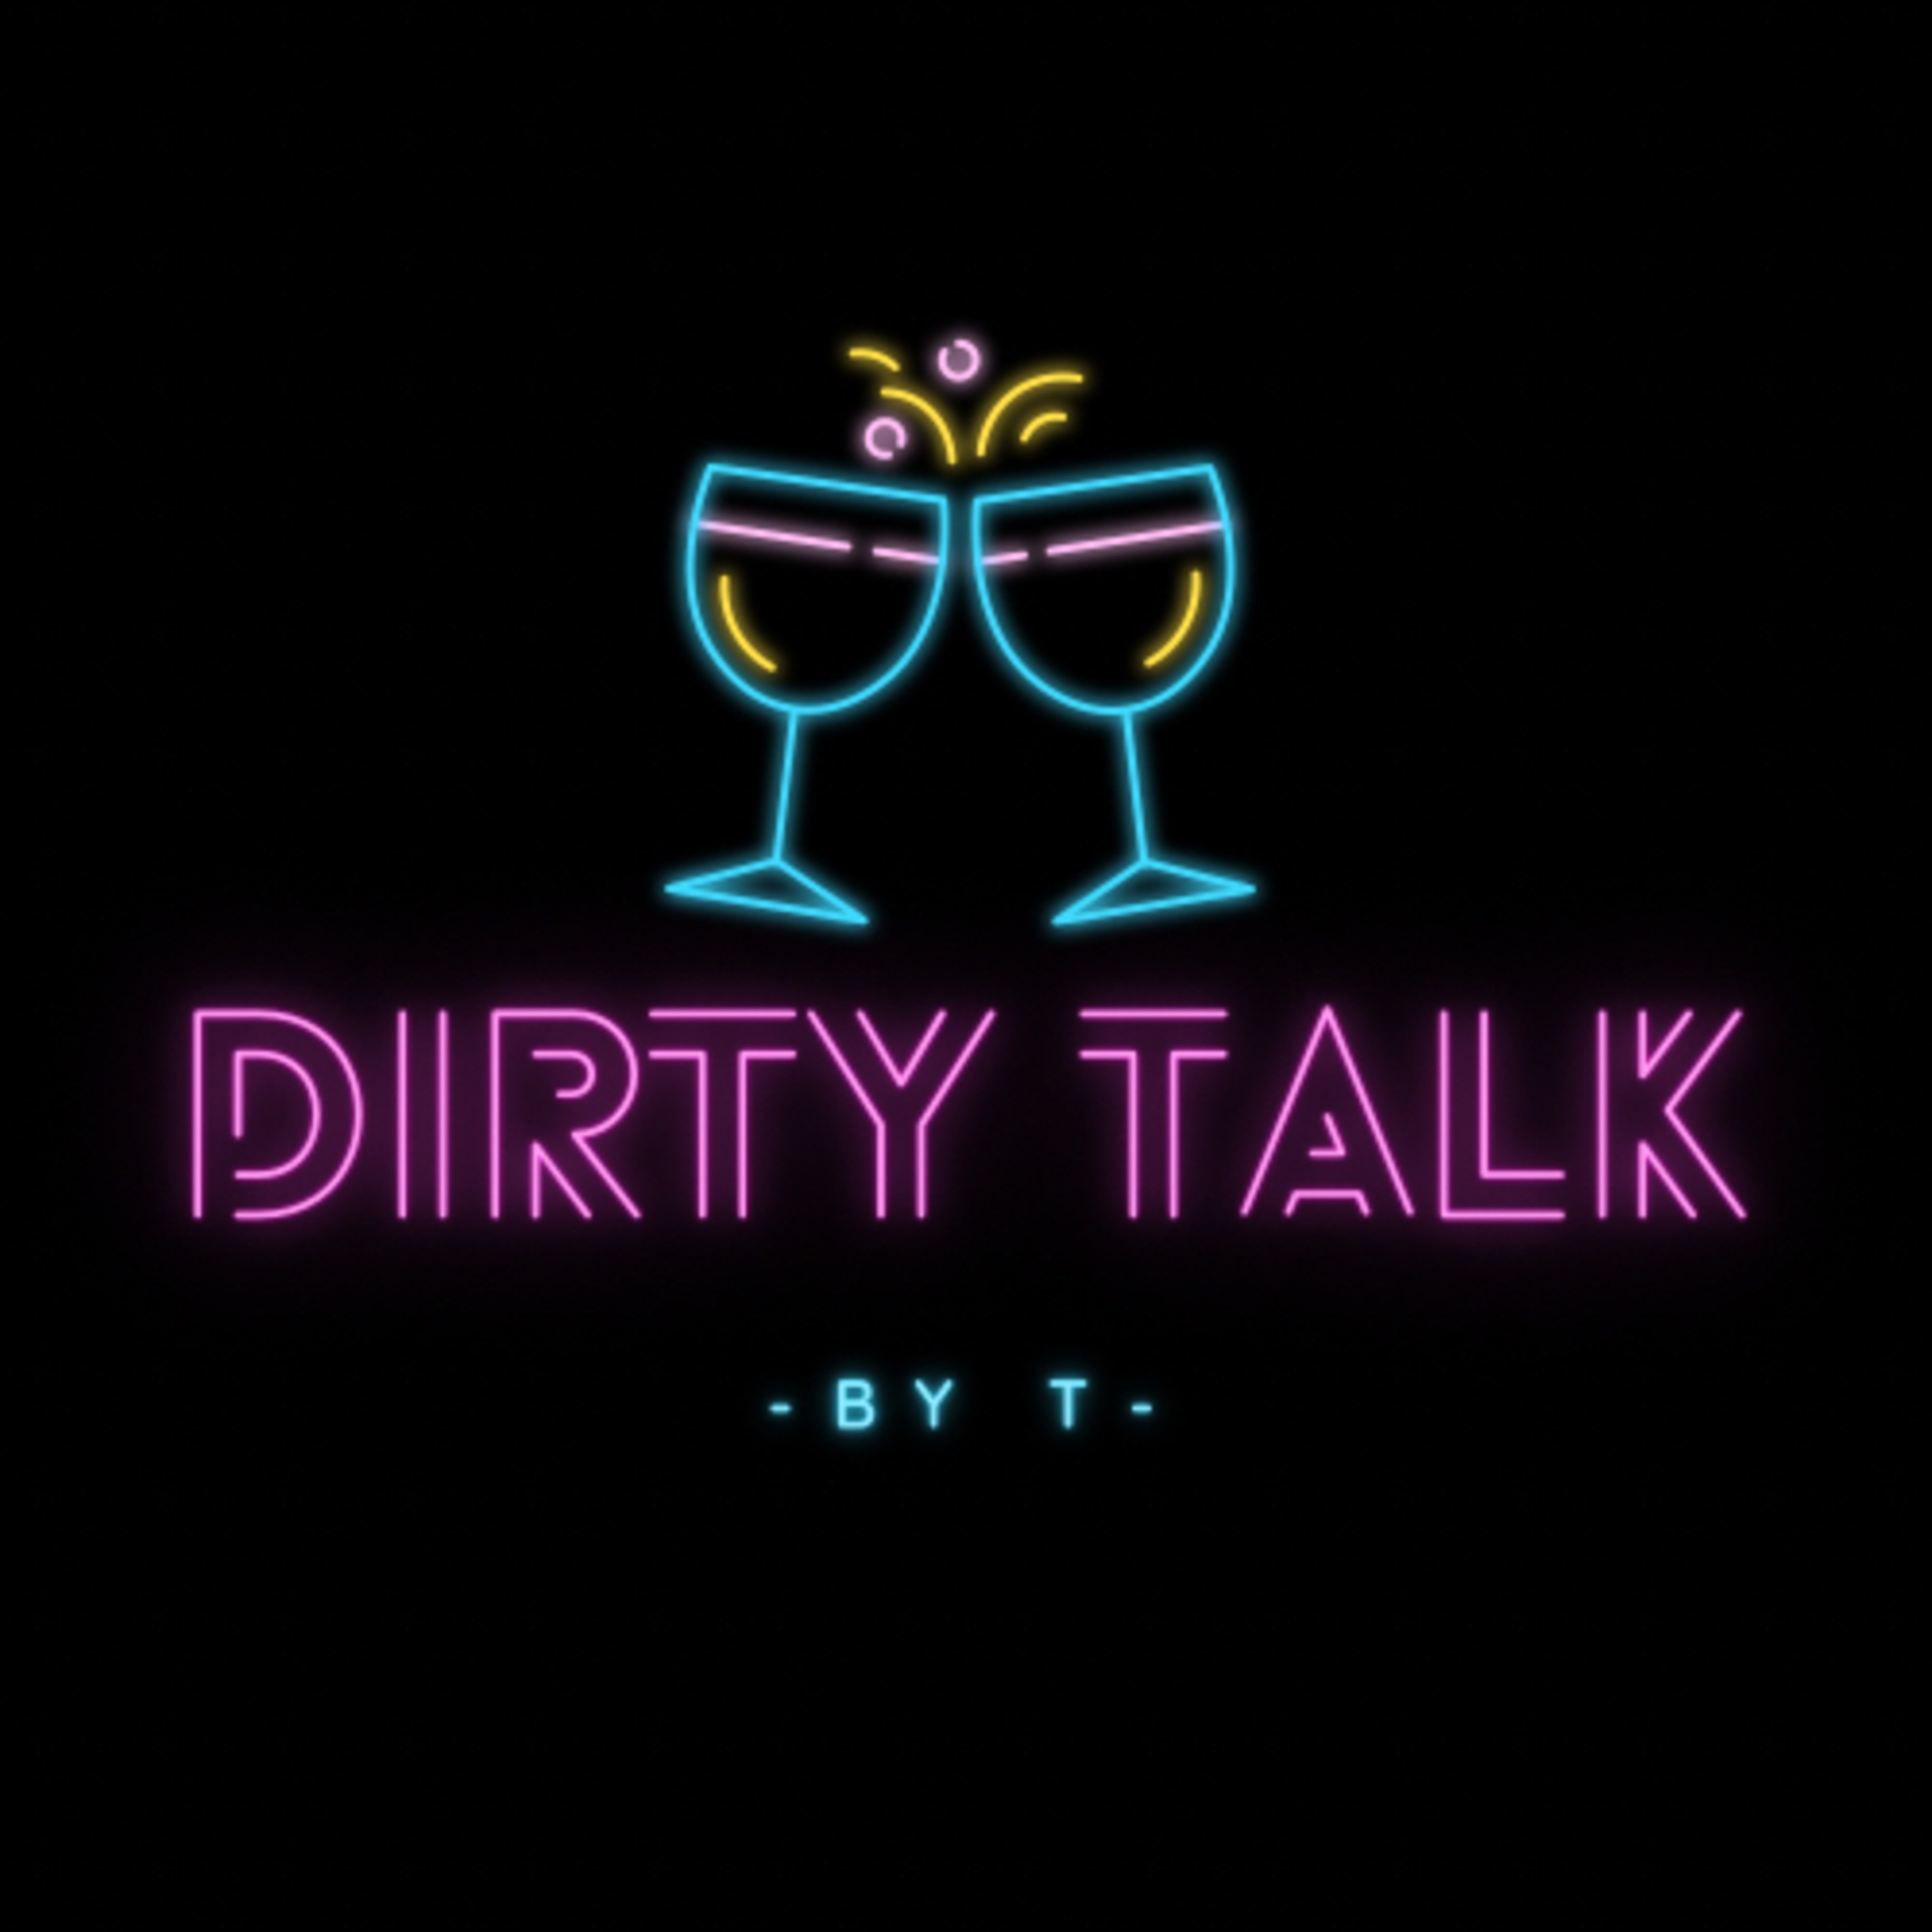 Dirty Talk by T